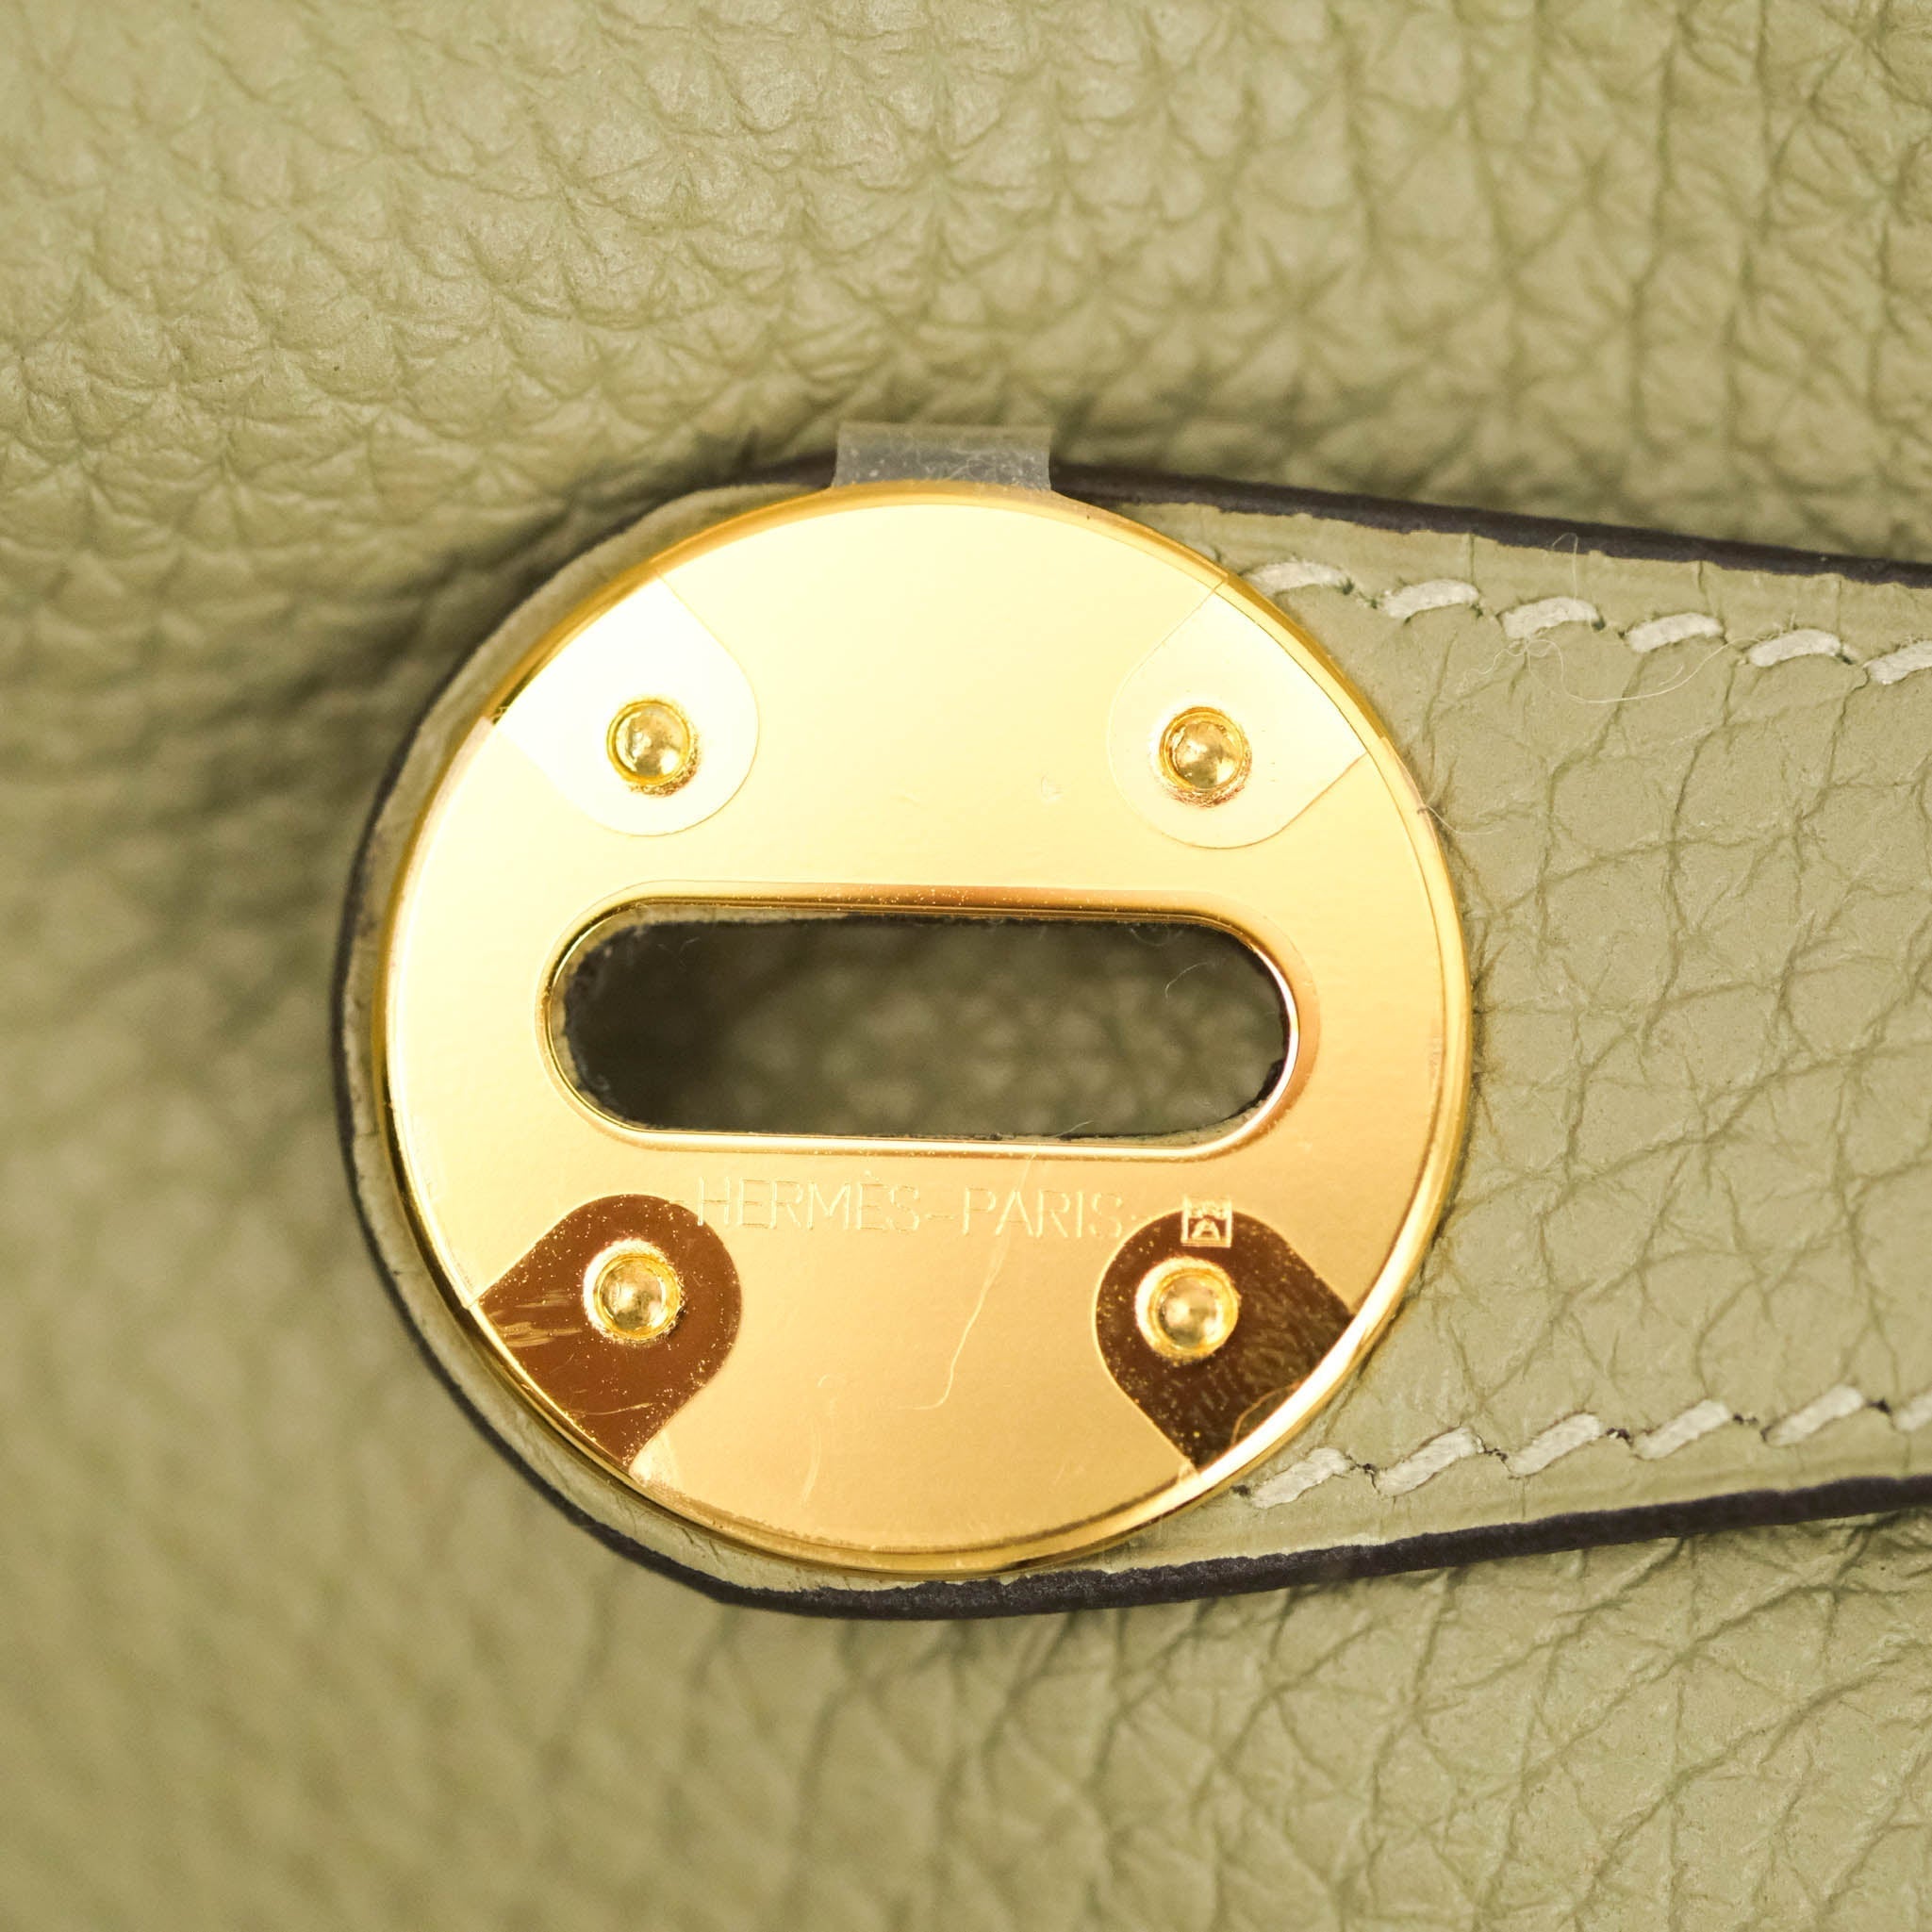 Hermès Lindy 26 Vert Cypress Clemence Gold Hardware – Coco Approved Studio